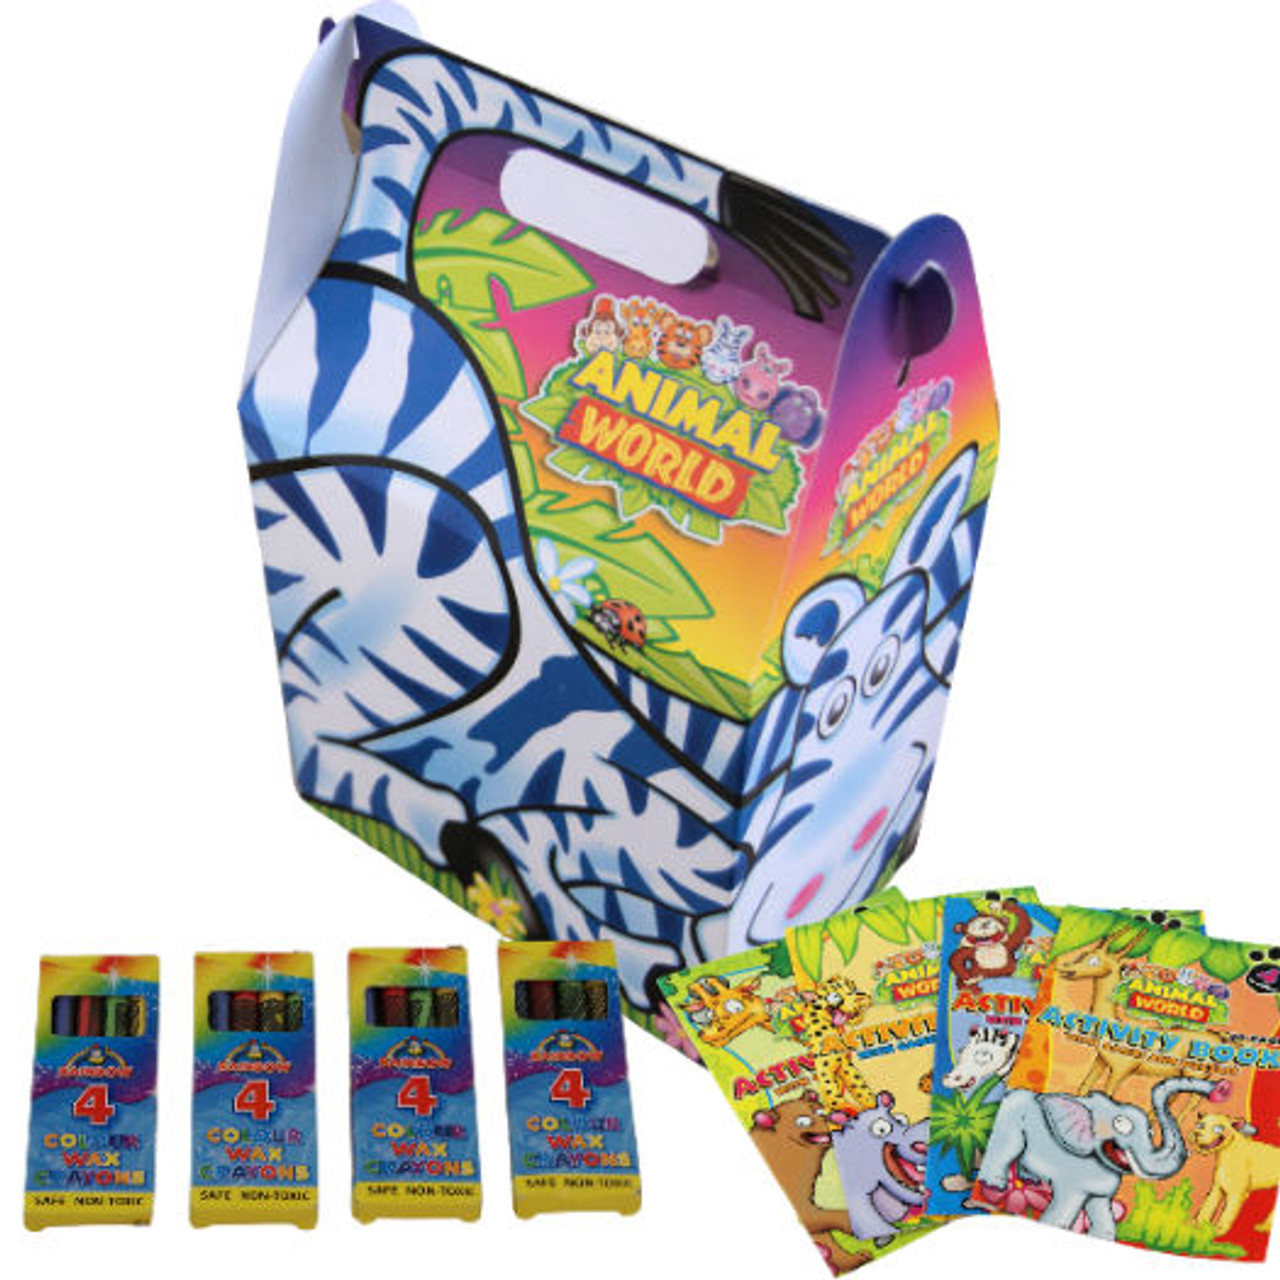 Childrens meal boxes, childrens Party box kits, childrens activity meal  boxes